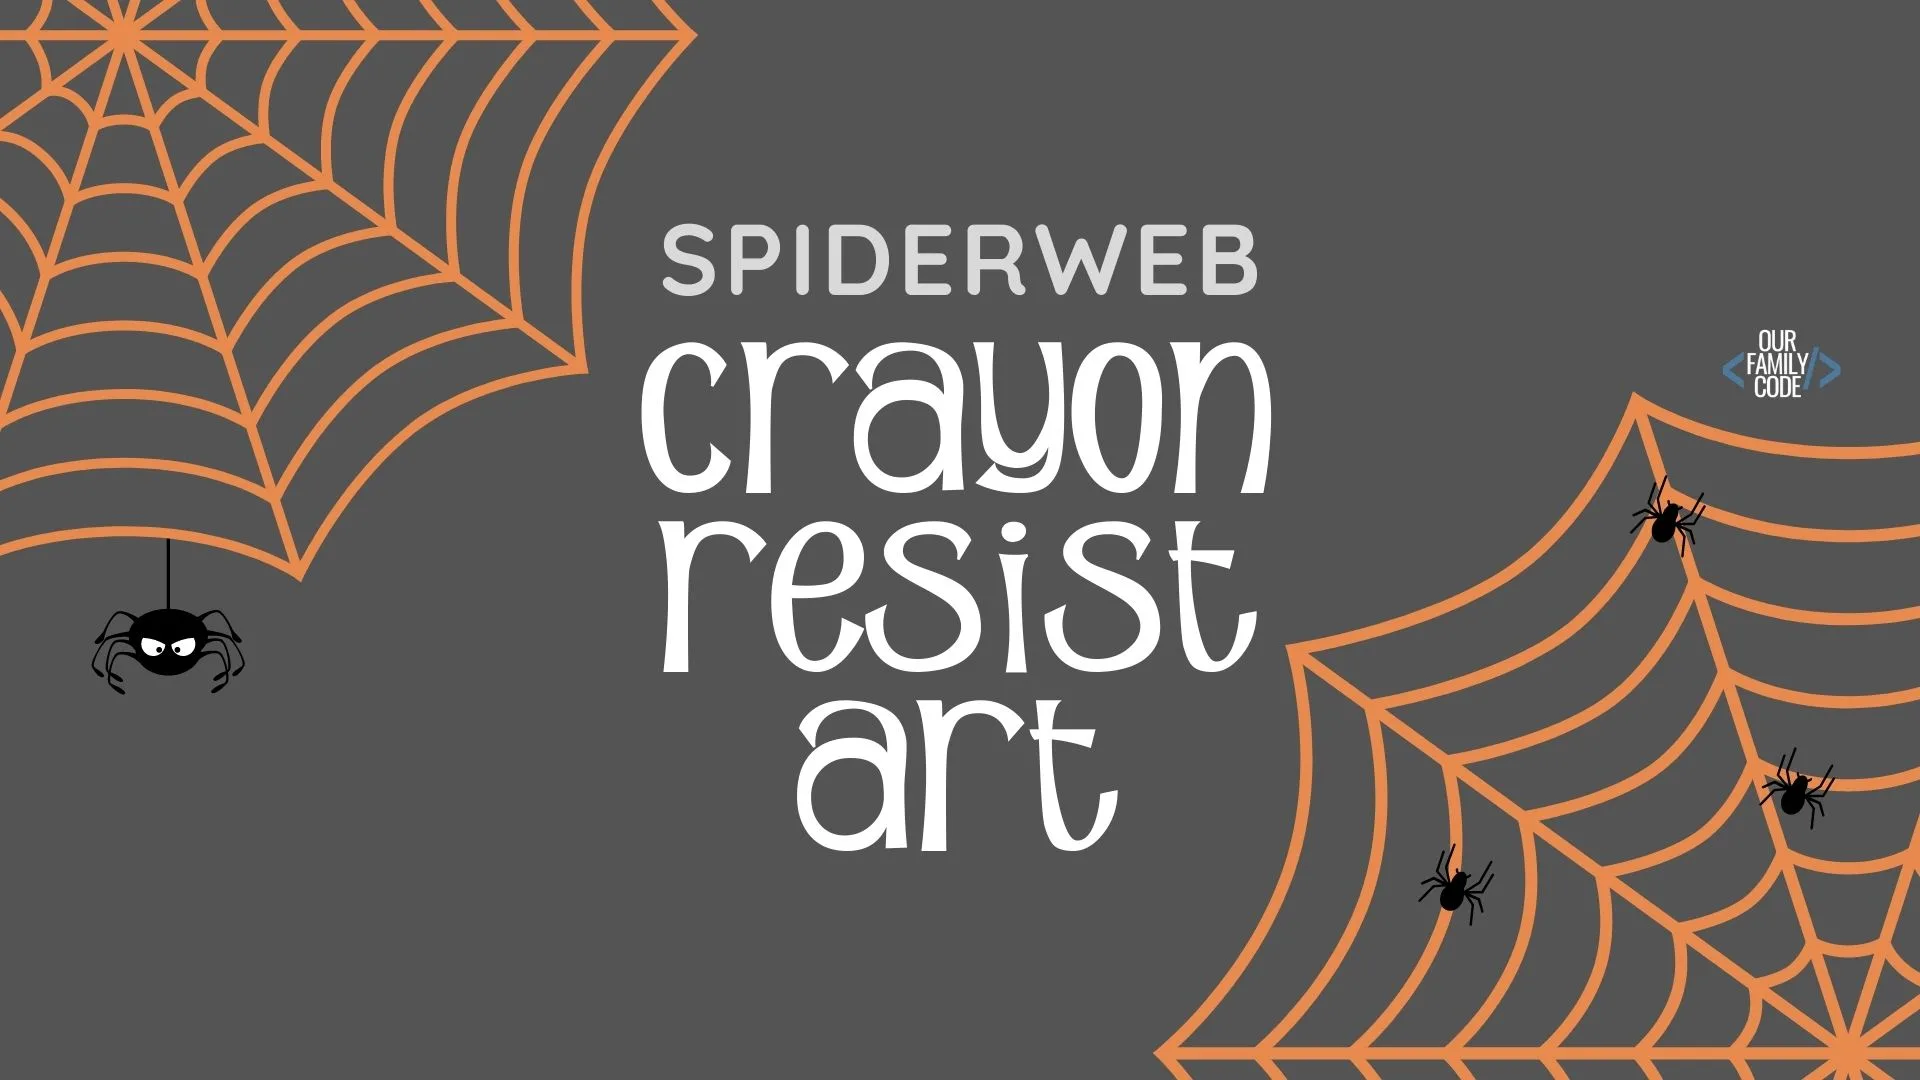 https://ourfamilycode.com/wp-content/uploads/2018/09/BH-spiderweb-crayon-resist-art.png.webp